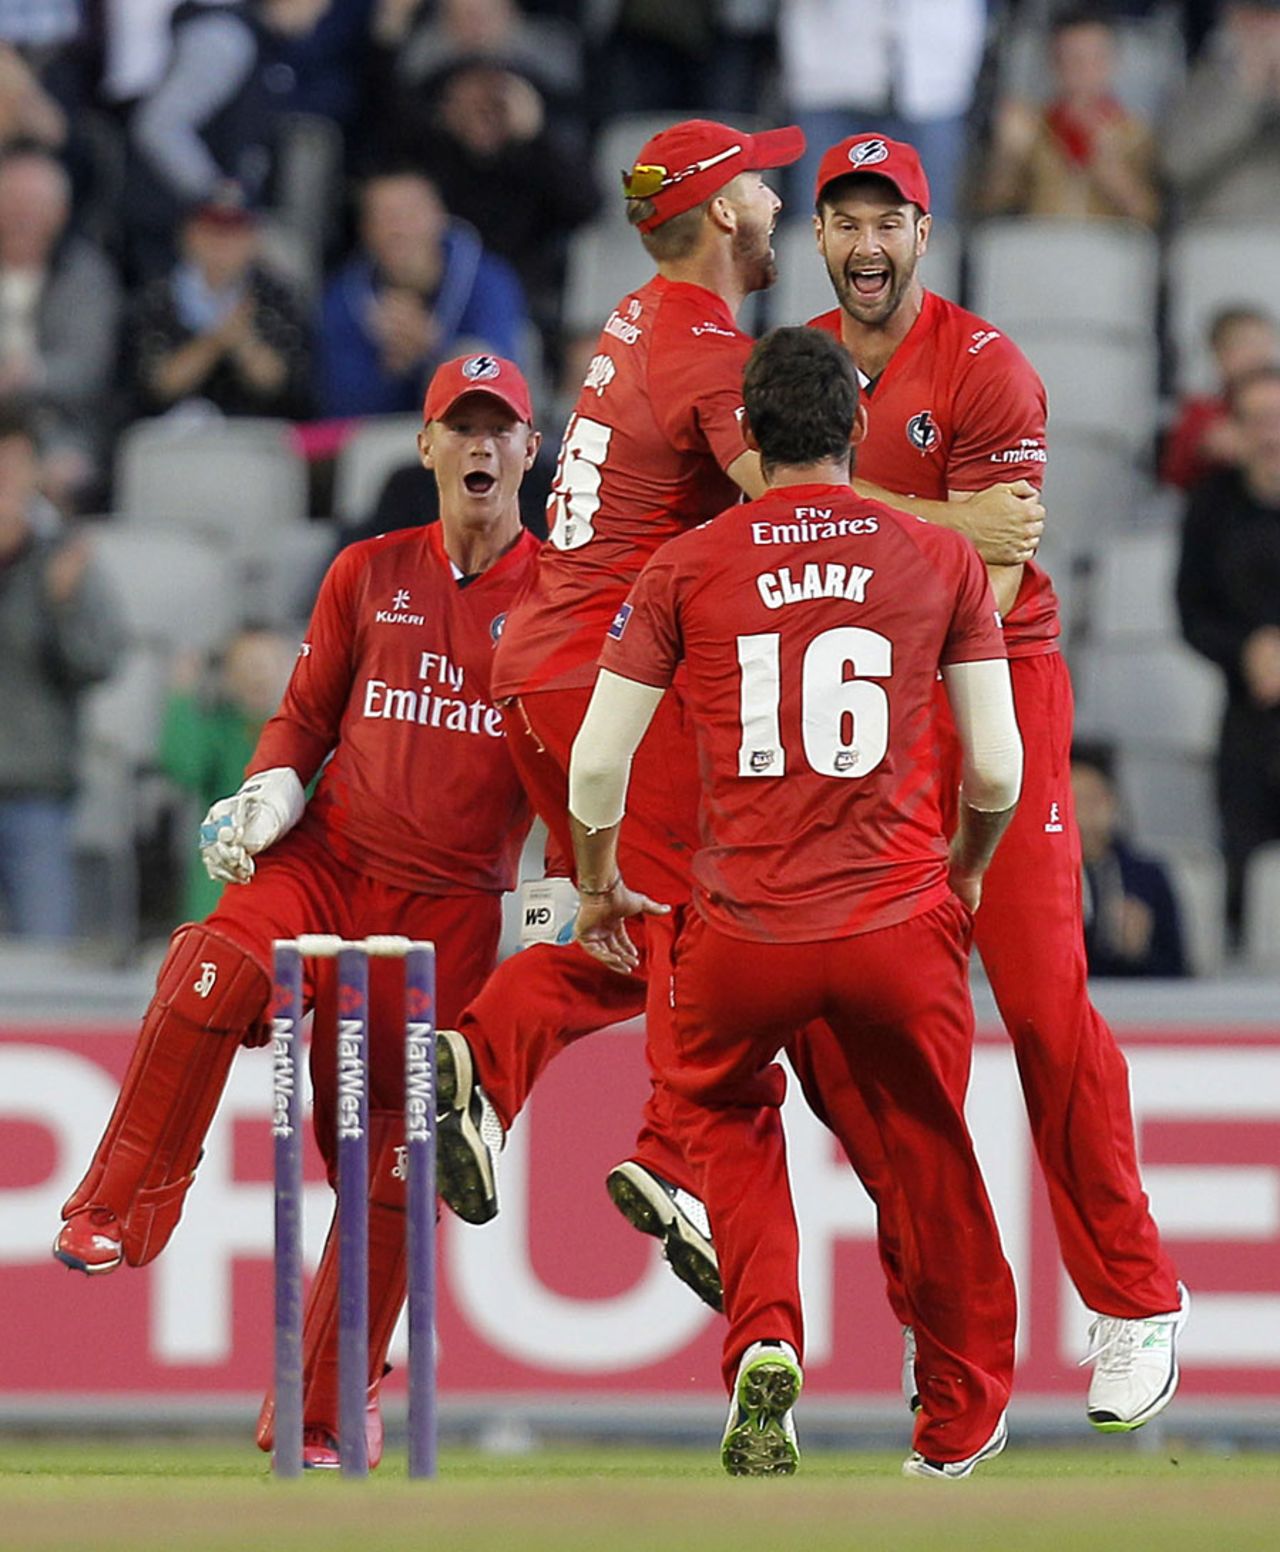 Tom Smith took the catch to give Jordan Clark three wickets in an over, Lancashire v Glamorgan, NatWest T20 Blast quarter-final, Old Trafford, August 2, 2014